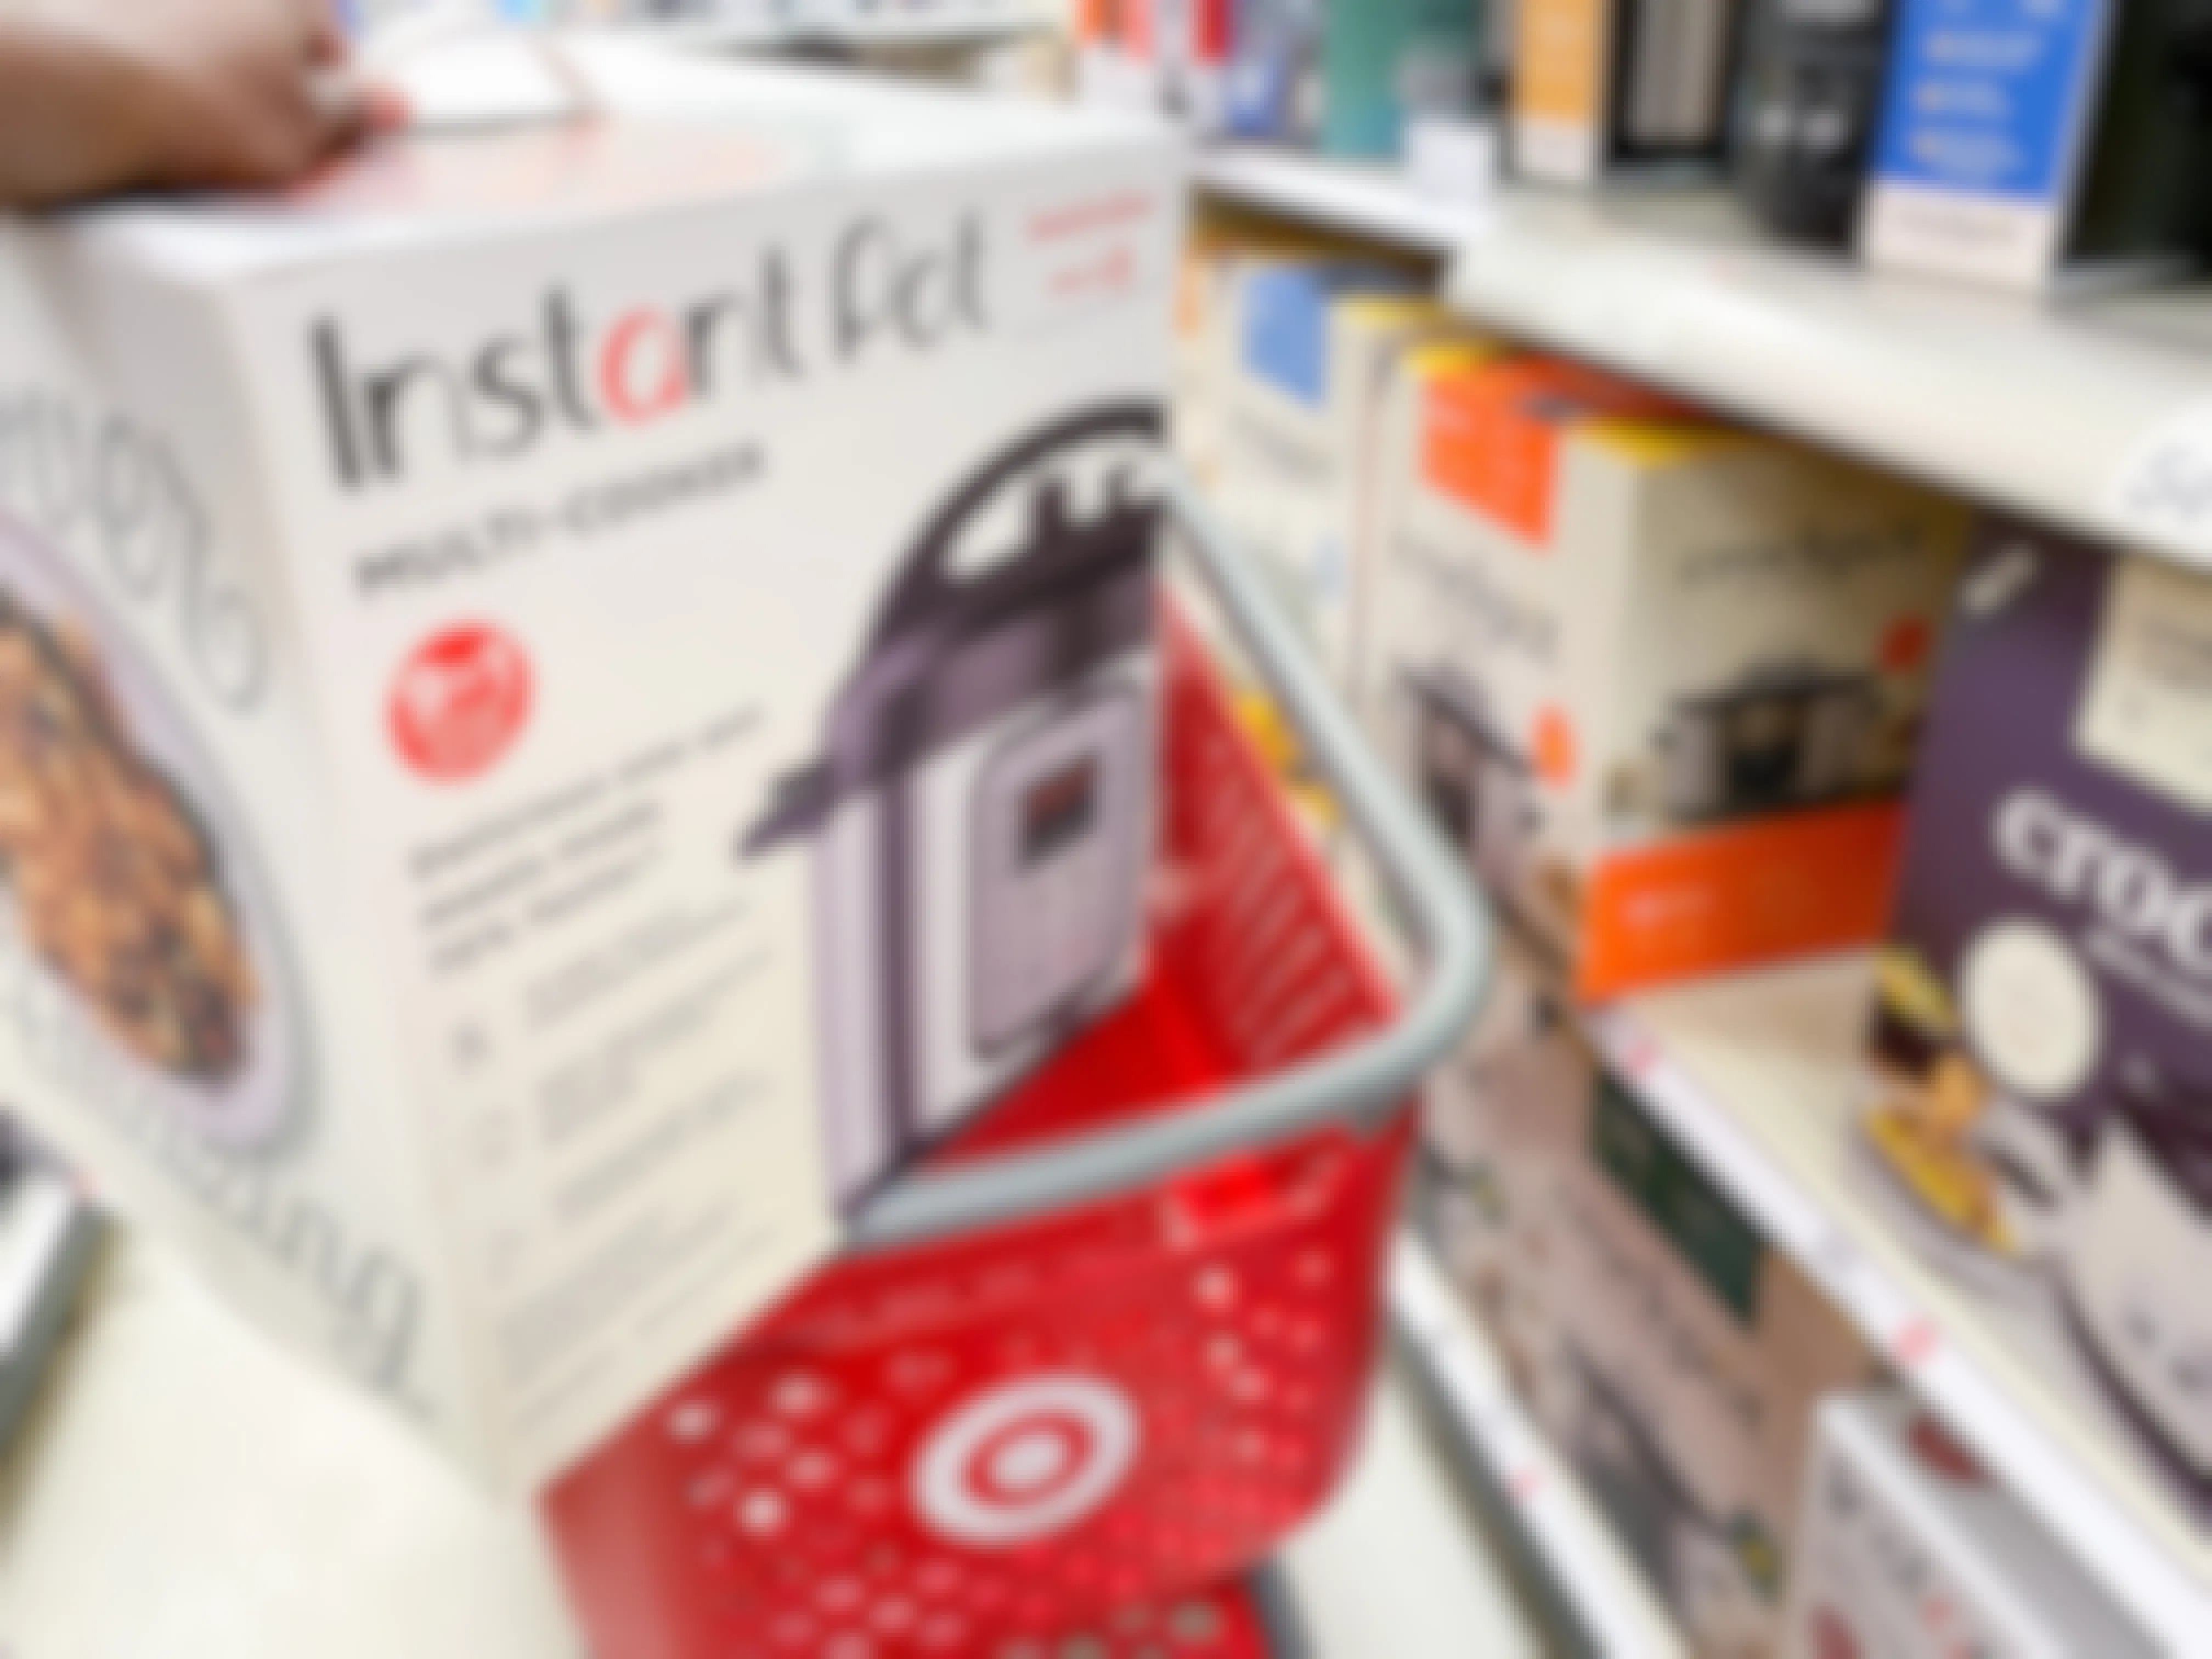 A person putting an Instant Pot 6-Quart 9-in-1 Bundle in its box into a Target shopping cart.